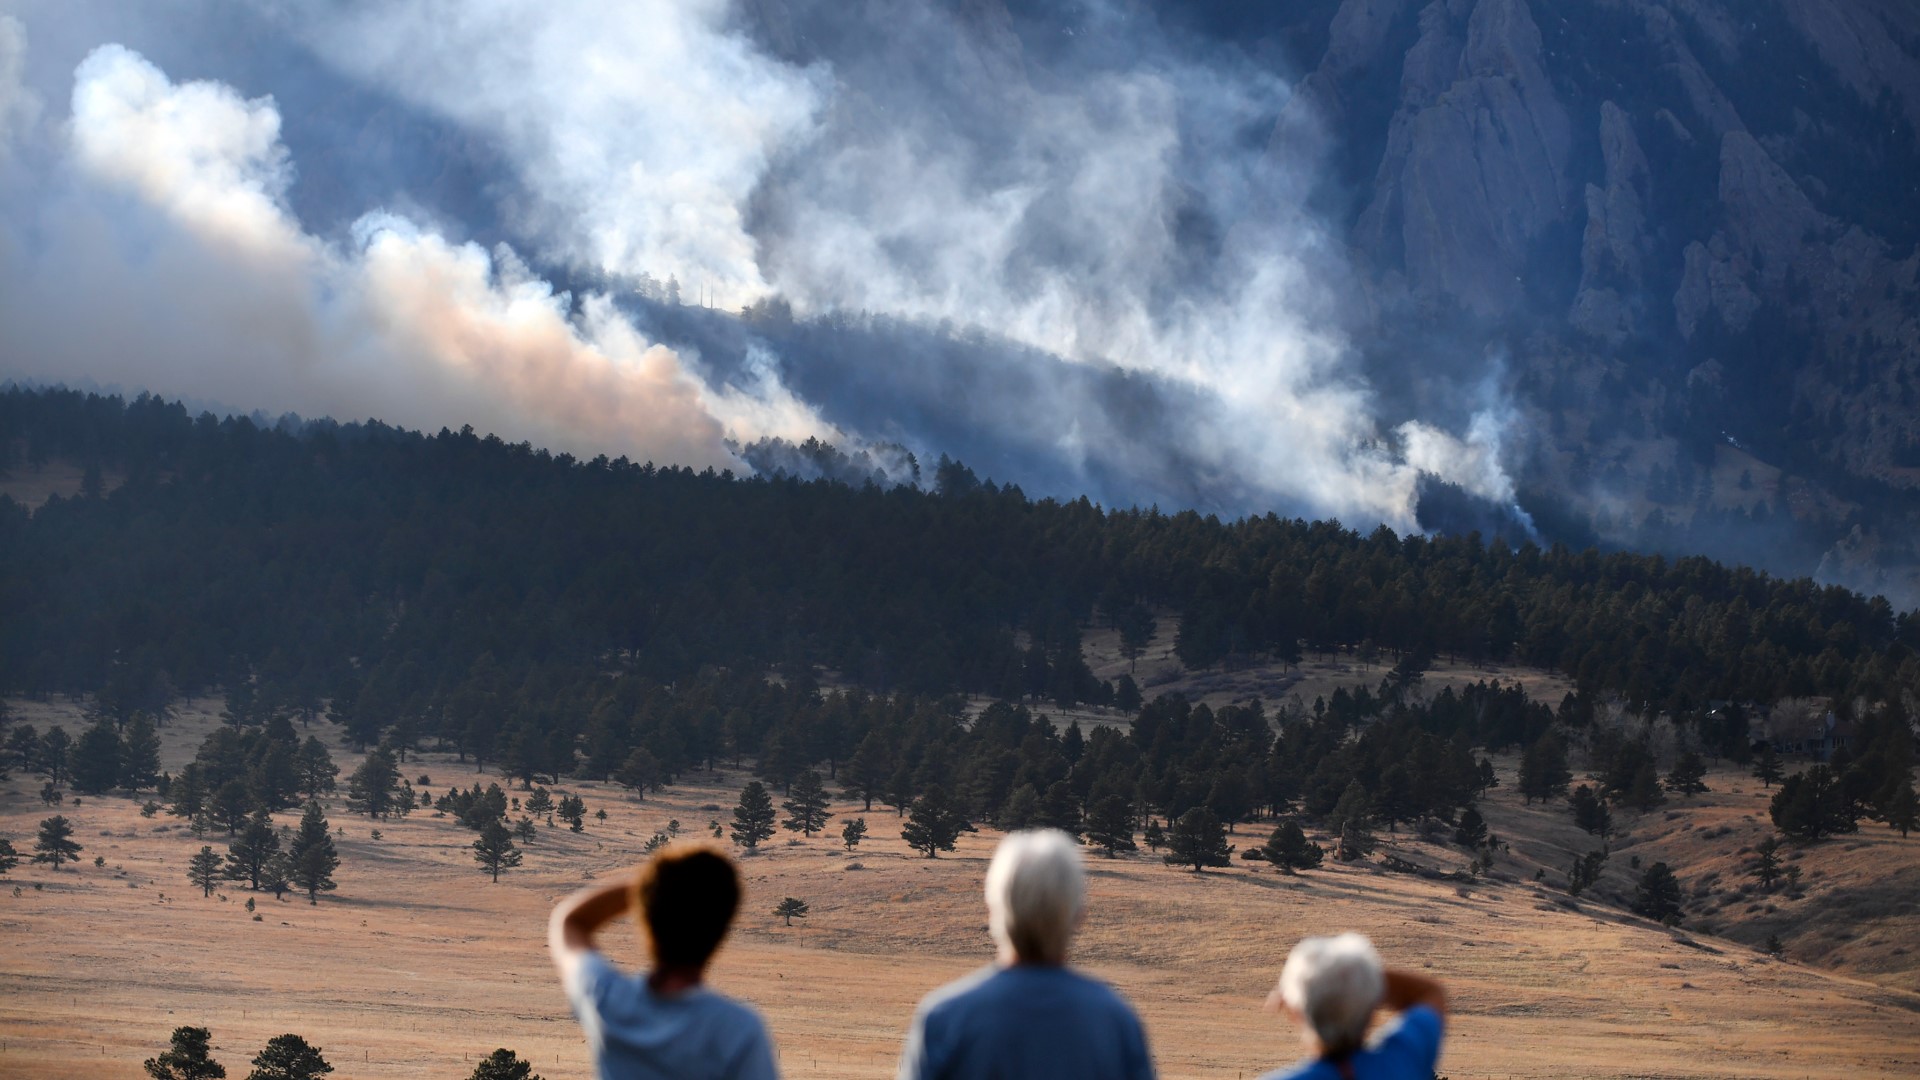 Our Carley Gomez spoke with U.S. Forest Service about their concerns with potential wildfires blowing into nearby housing and developments, though staffing is short.